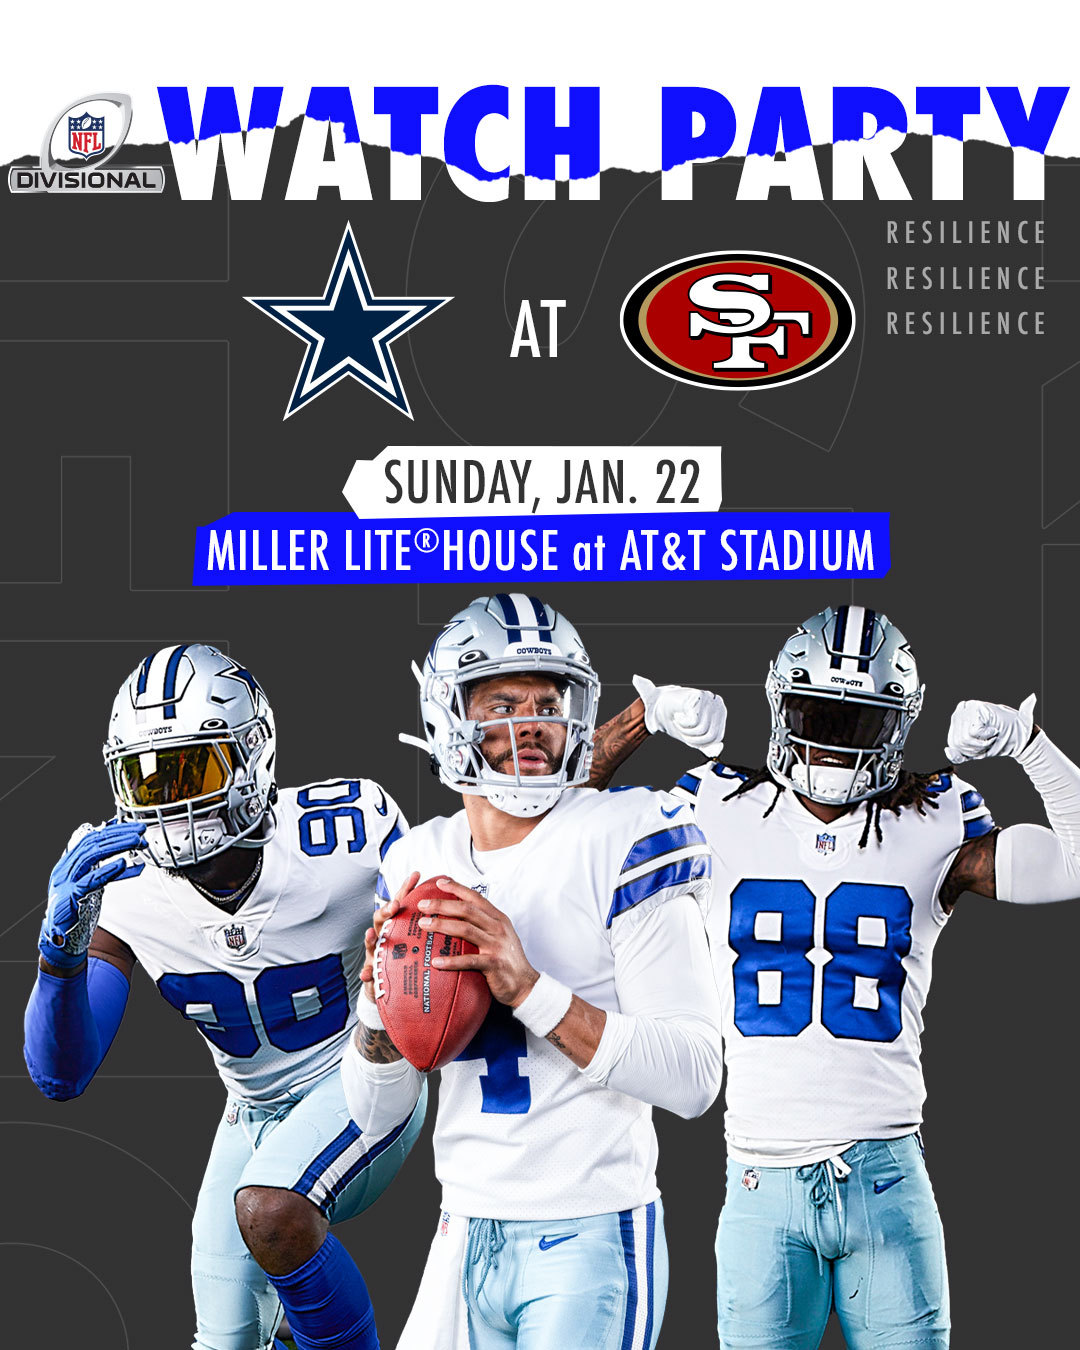 AT&T Stadium on Twitter: 'Join us for a FREE Divisional Watch Party on  Sunday, January 22nd at Miller Lite®House! Fans can enjoy $5 Miller Lites,  food trucks, lawn games, and more while